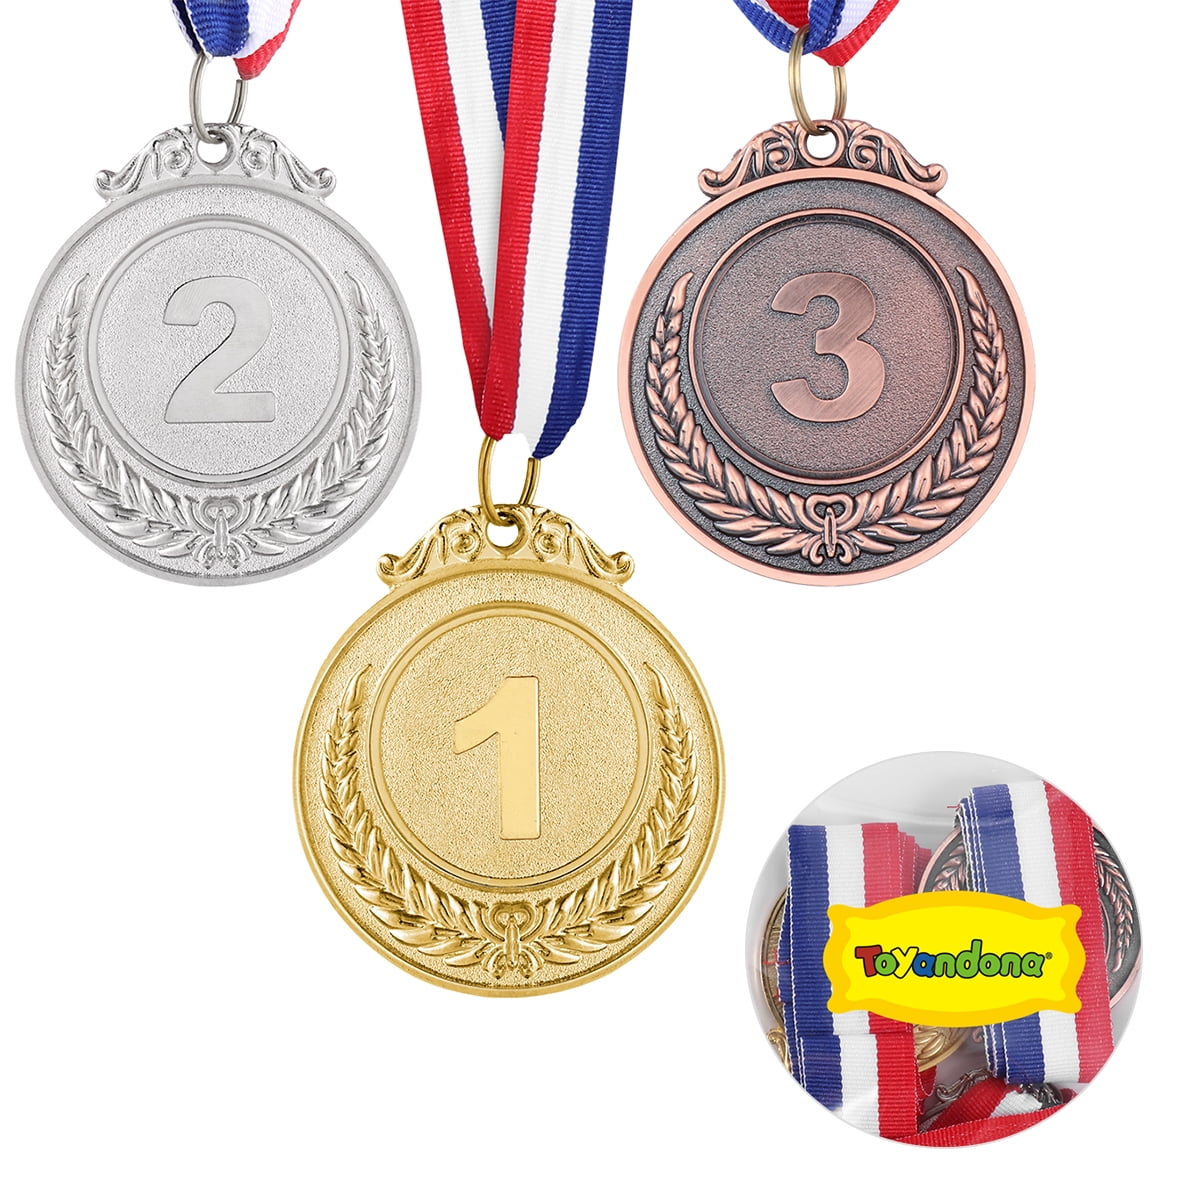 bekræfte flaske kalligraf Gold Silver Bronze Award Medals Olympic Style Winner Award Medals Metal  Medals Prizes with Neck Ribbon for Competitions Party Olympic - Walmart.com